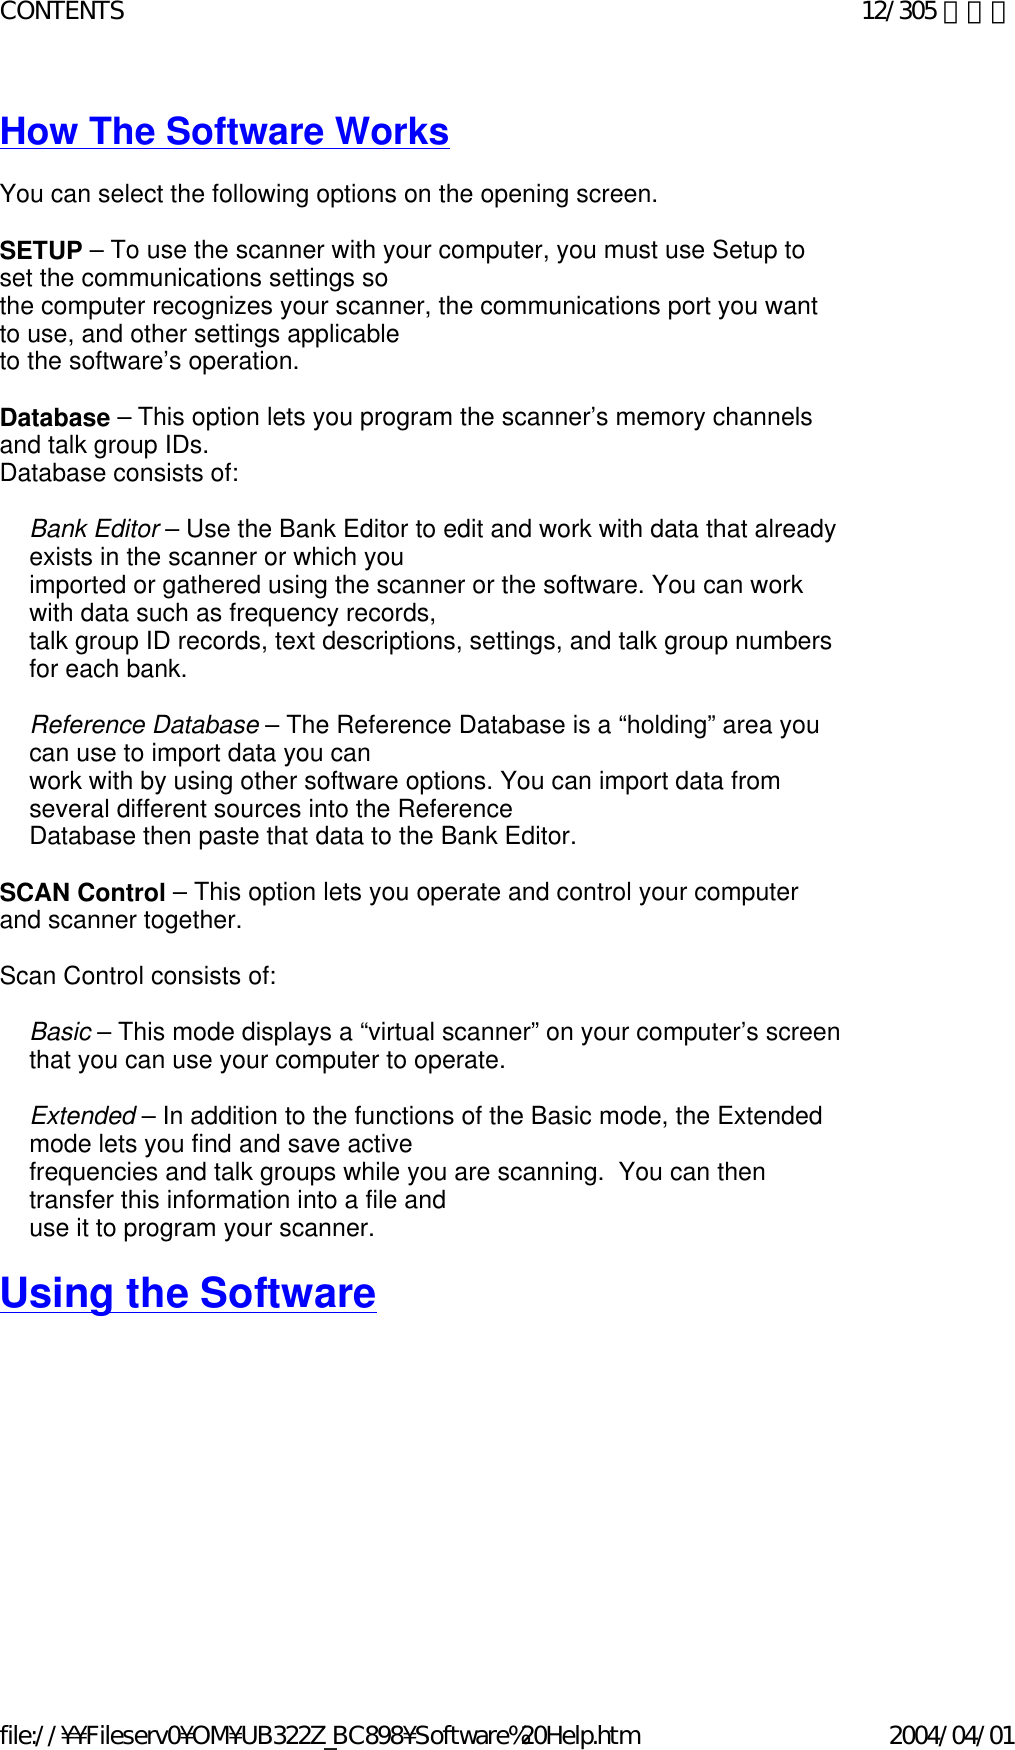 How The Software Works   You can select the following options on the opening screen.   SETUP – To use the scanner with your computer, you must use Setup to set the communications settings so  the computer recognizes your scanner, the communications port you want to use, and other settings applicable to the software’s operation.    Database – This option lets you program the scanner’s memory channels and talk group IDs.   Database consists of:    Bank Editor – Use the Bank Editor to edit and work with data that already exists in the scanner or which you  imported or gathered using the scanner or the software. You can work with data such as frequency records,  talk group ID records, text descriptions, settings, and talk group numbers for each bank.   Reference Database – The Reference Database is a “holding” area you can use to import data you can  work with by using other software options. You can import data from several different sources into the Reference  Database then paste that data to the Bank Editor.   SCAN Control – This option lets you operate and control your computer and scanner together.    Scan Control consists of:    Basic – This mode displays a “virtual scanner” on your computer’s screen that you can use your computer to operate.    Extended – In addition to the functions of the Basic mode, the Extended mode lets you find and save active  frequencies and talk groups while you are scanning.  You can then transfer this information into a file and  use it to program your scanner.   Using the Software   12/305 ページCONTENTS2004/04/01file://¥¥Fileserv0¥OM¥UB322Z_BC898¥Software%20Help.htm